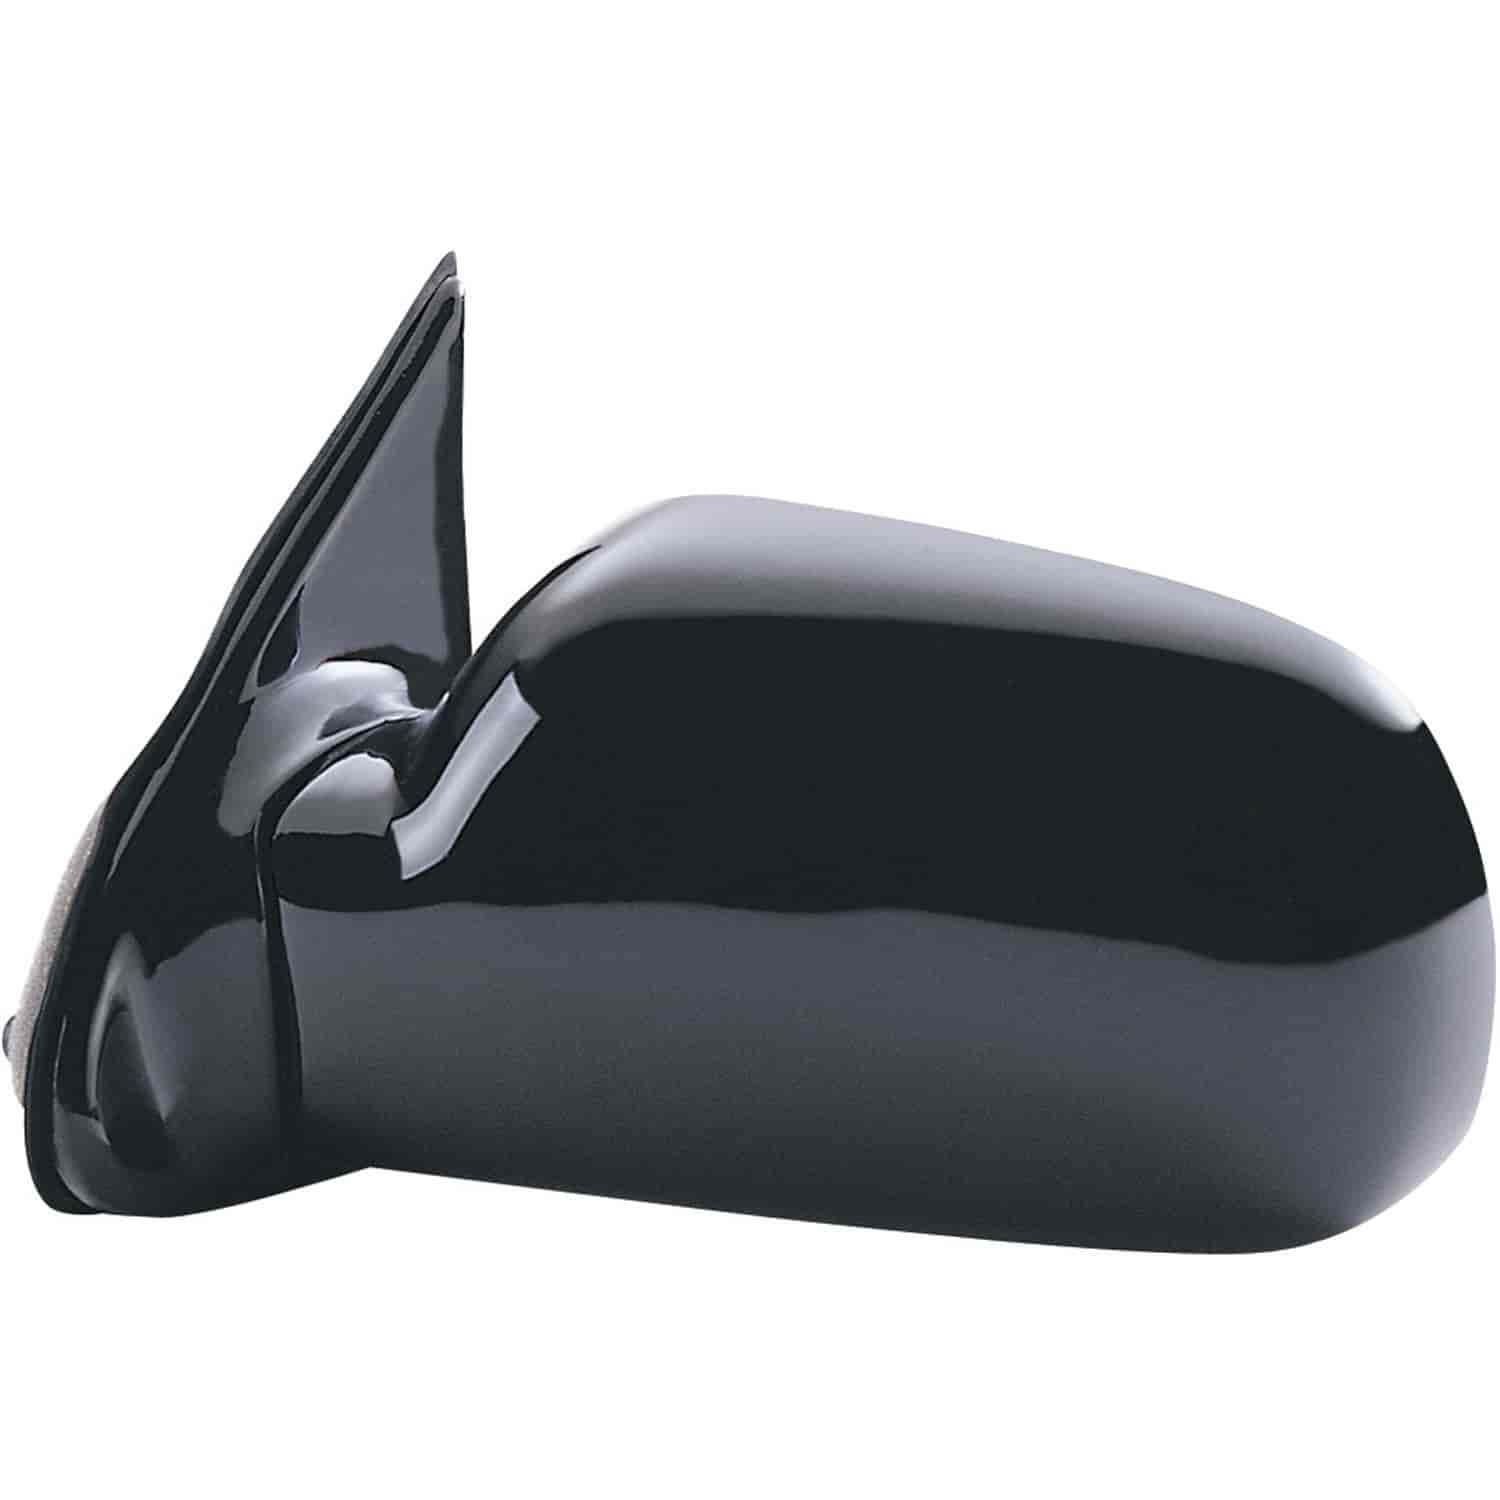 OEM Style Replacement mirror for 89-94 Suzuki Swift HB & Sedan GA GL driver side mirror tested to fi